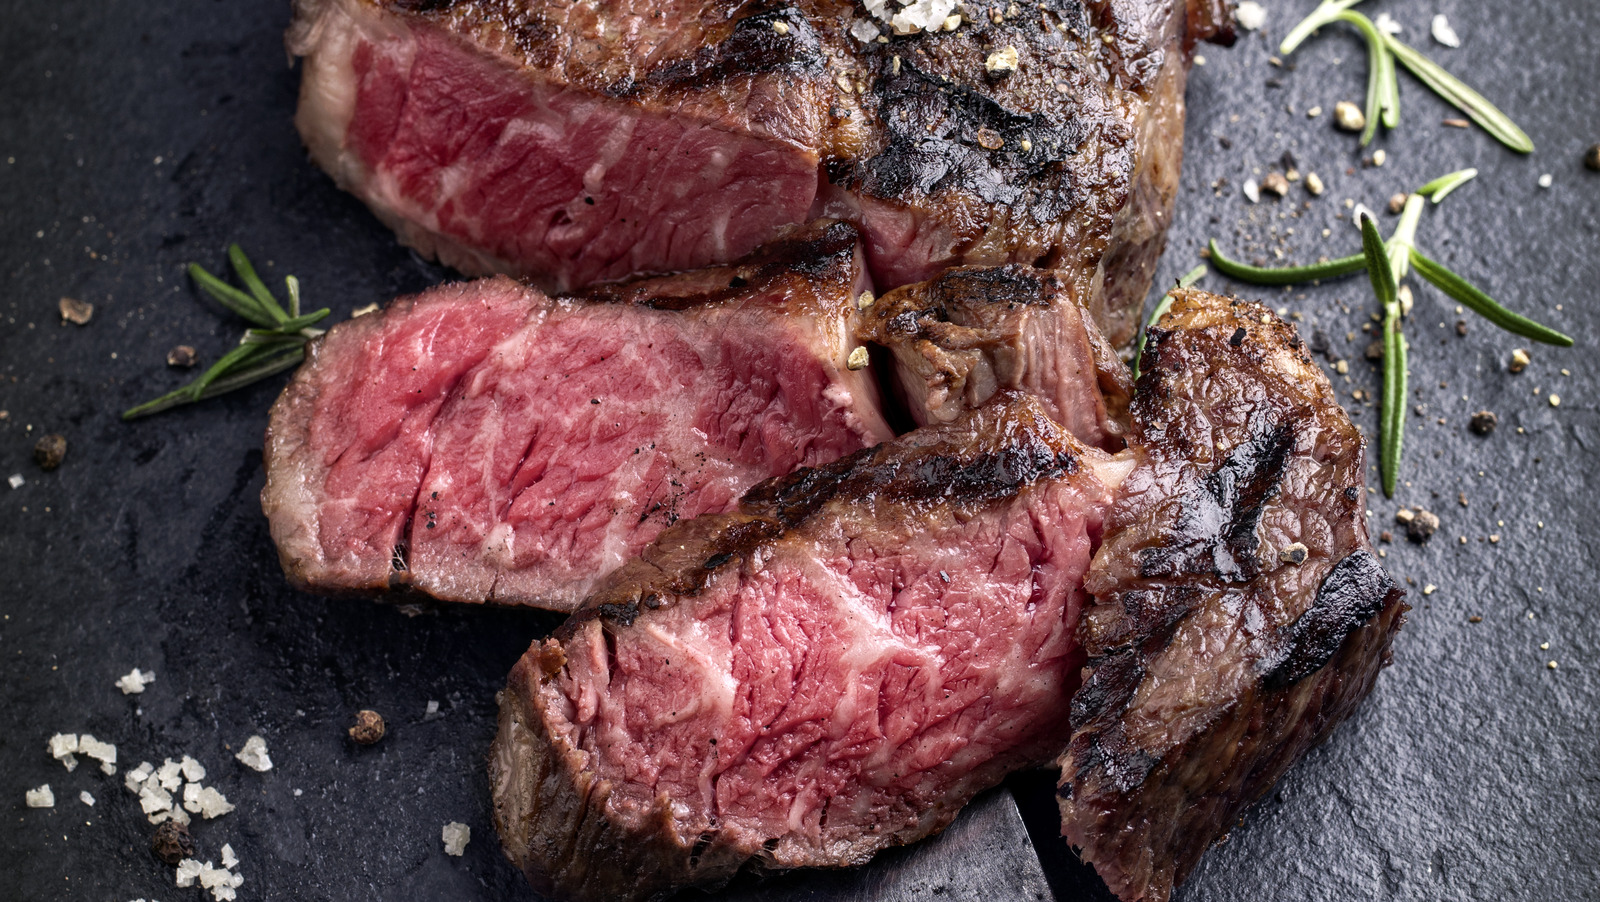 https://www.tastingtable.com/img/gallery/everything-you-need-to-know-about-sous-vide-steak/l-intro-1664630900.jpg